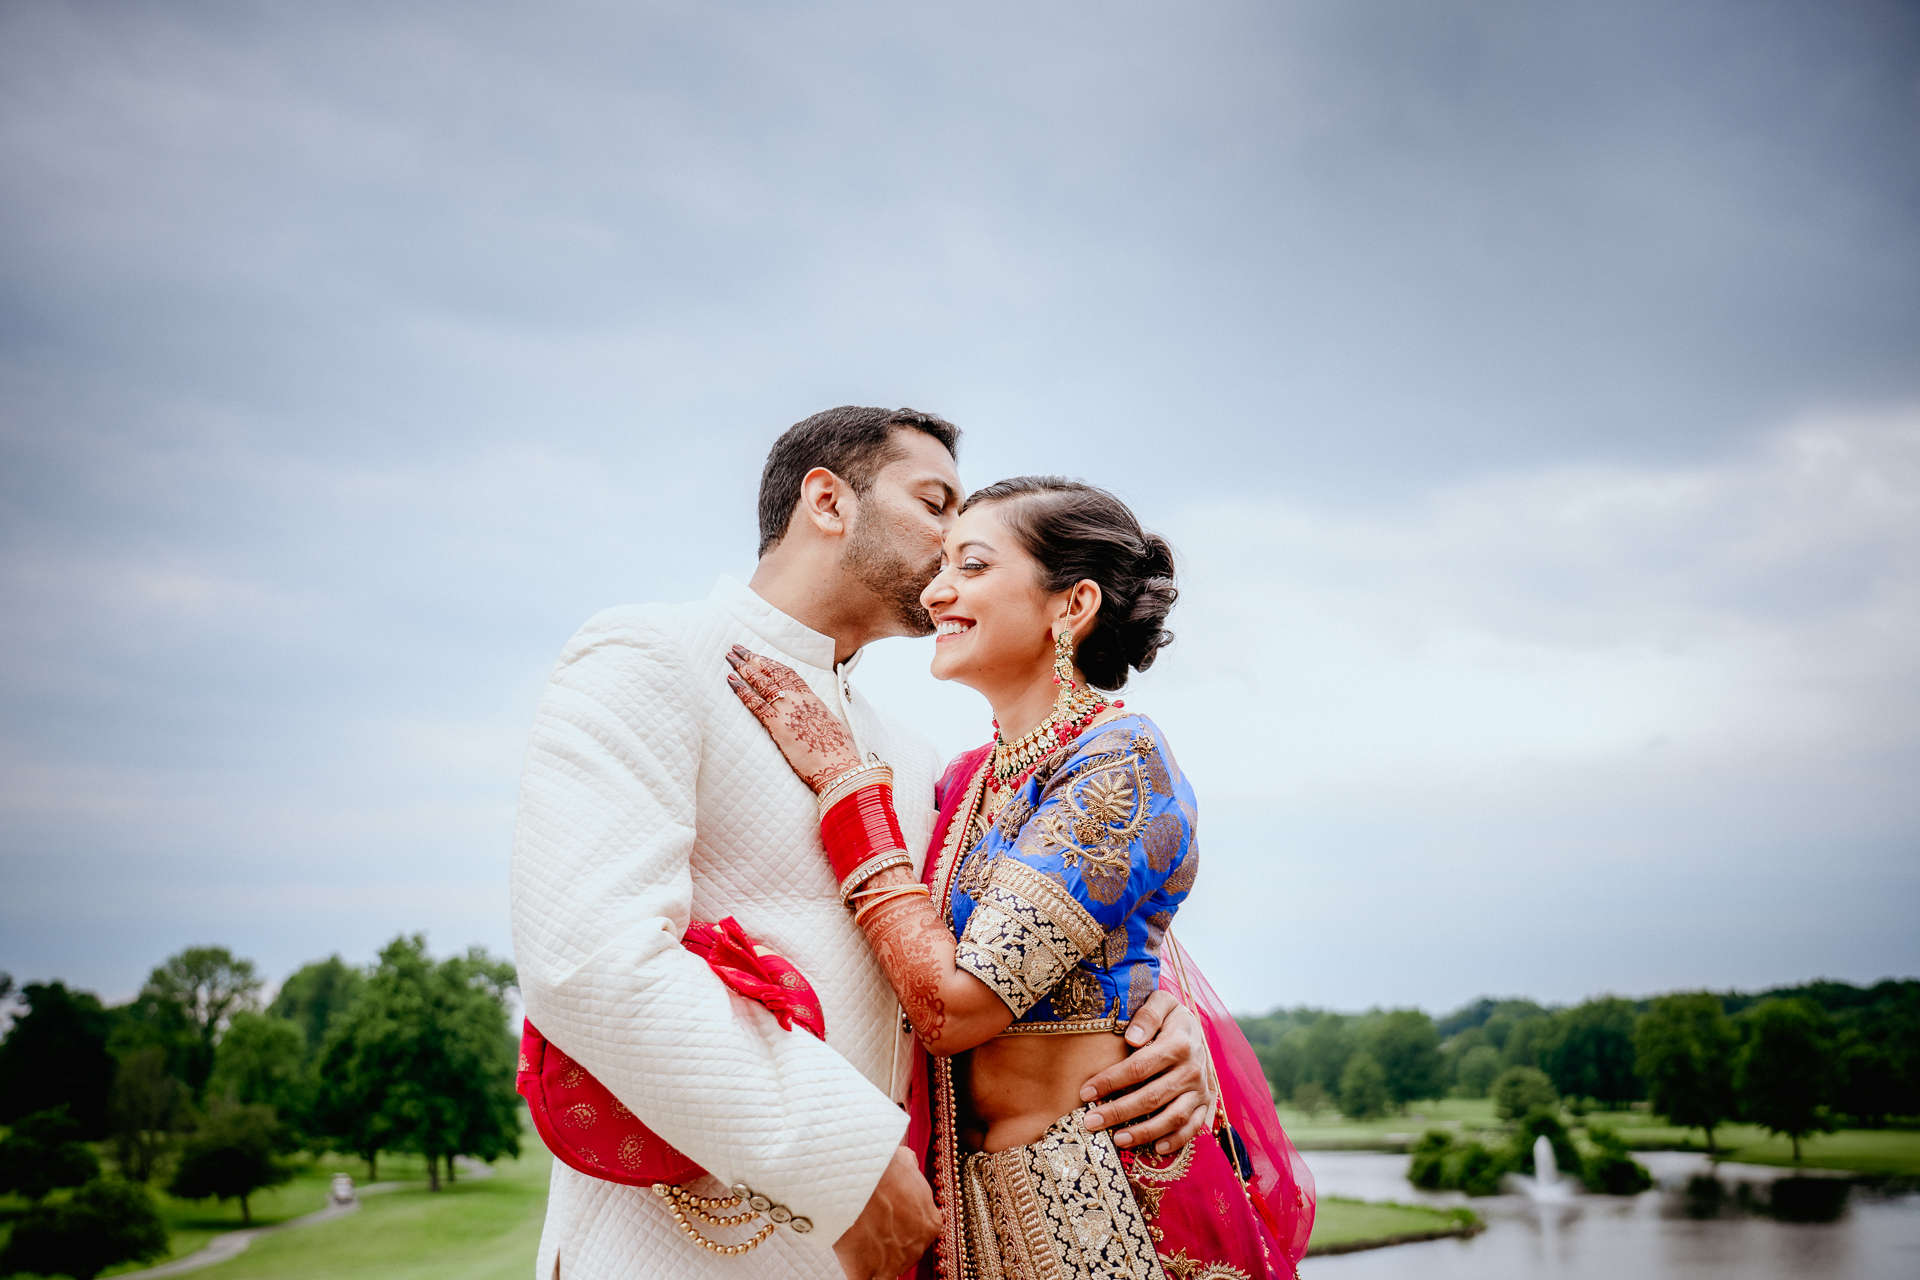 Bold Outdoor Indian Wedding | PreOwned Wedding Dresses | Wedding couple  poses, Indian wedding couple, Indian wedding photography poses